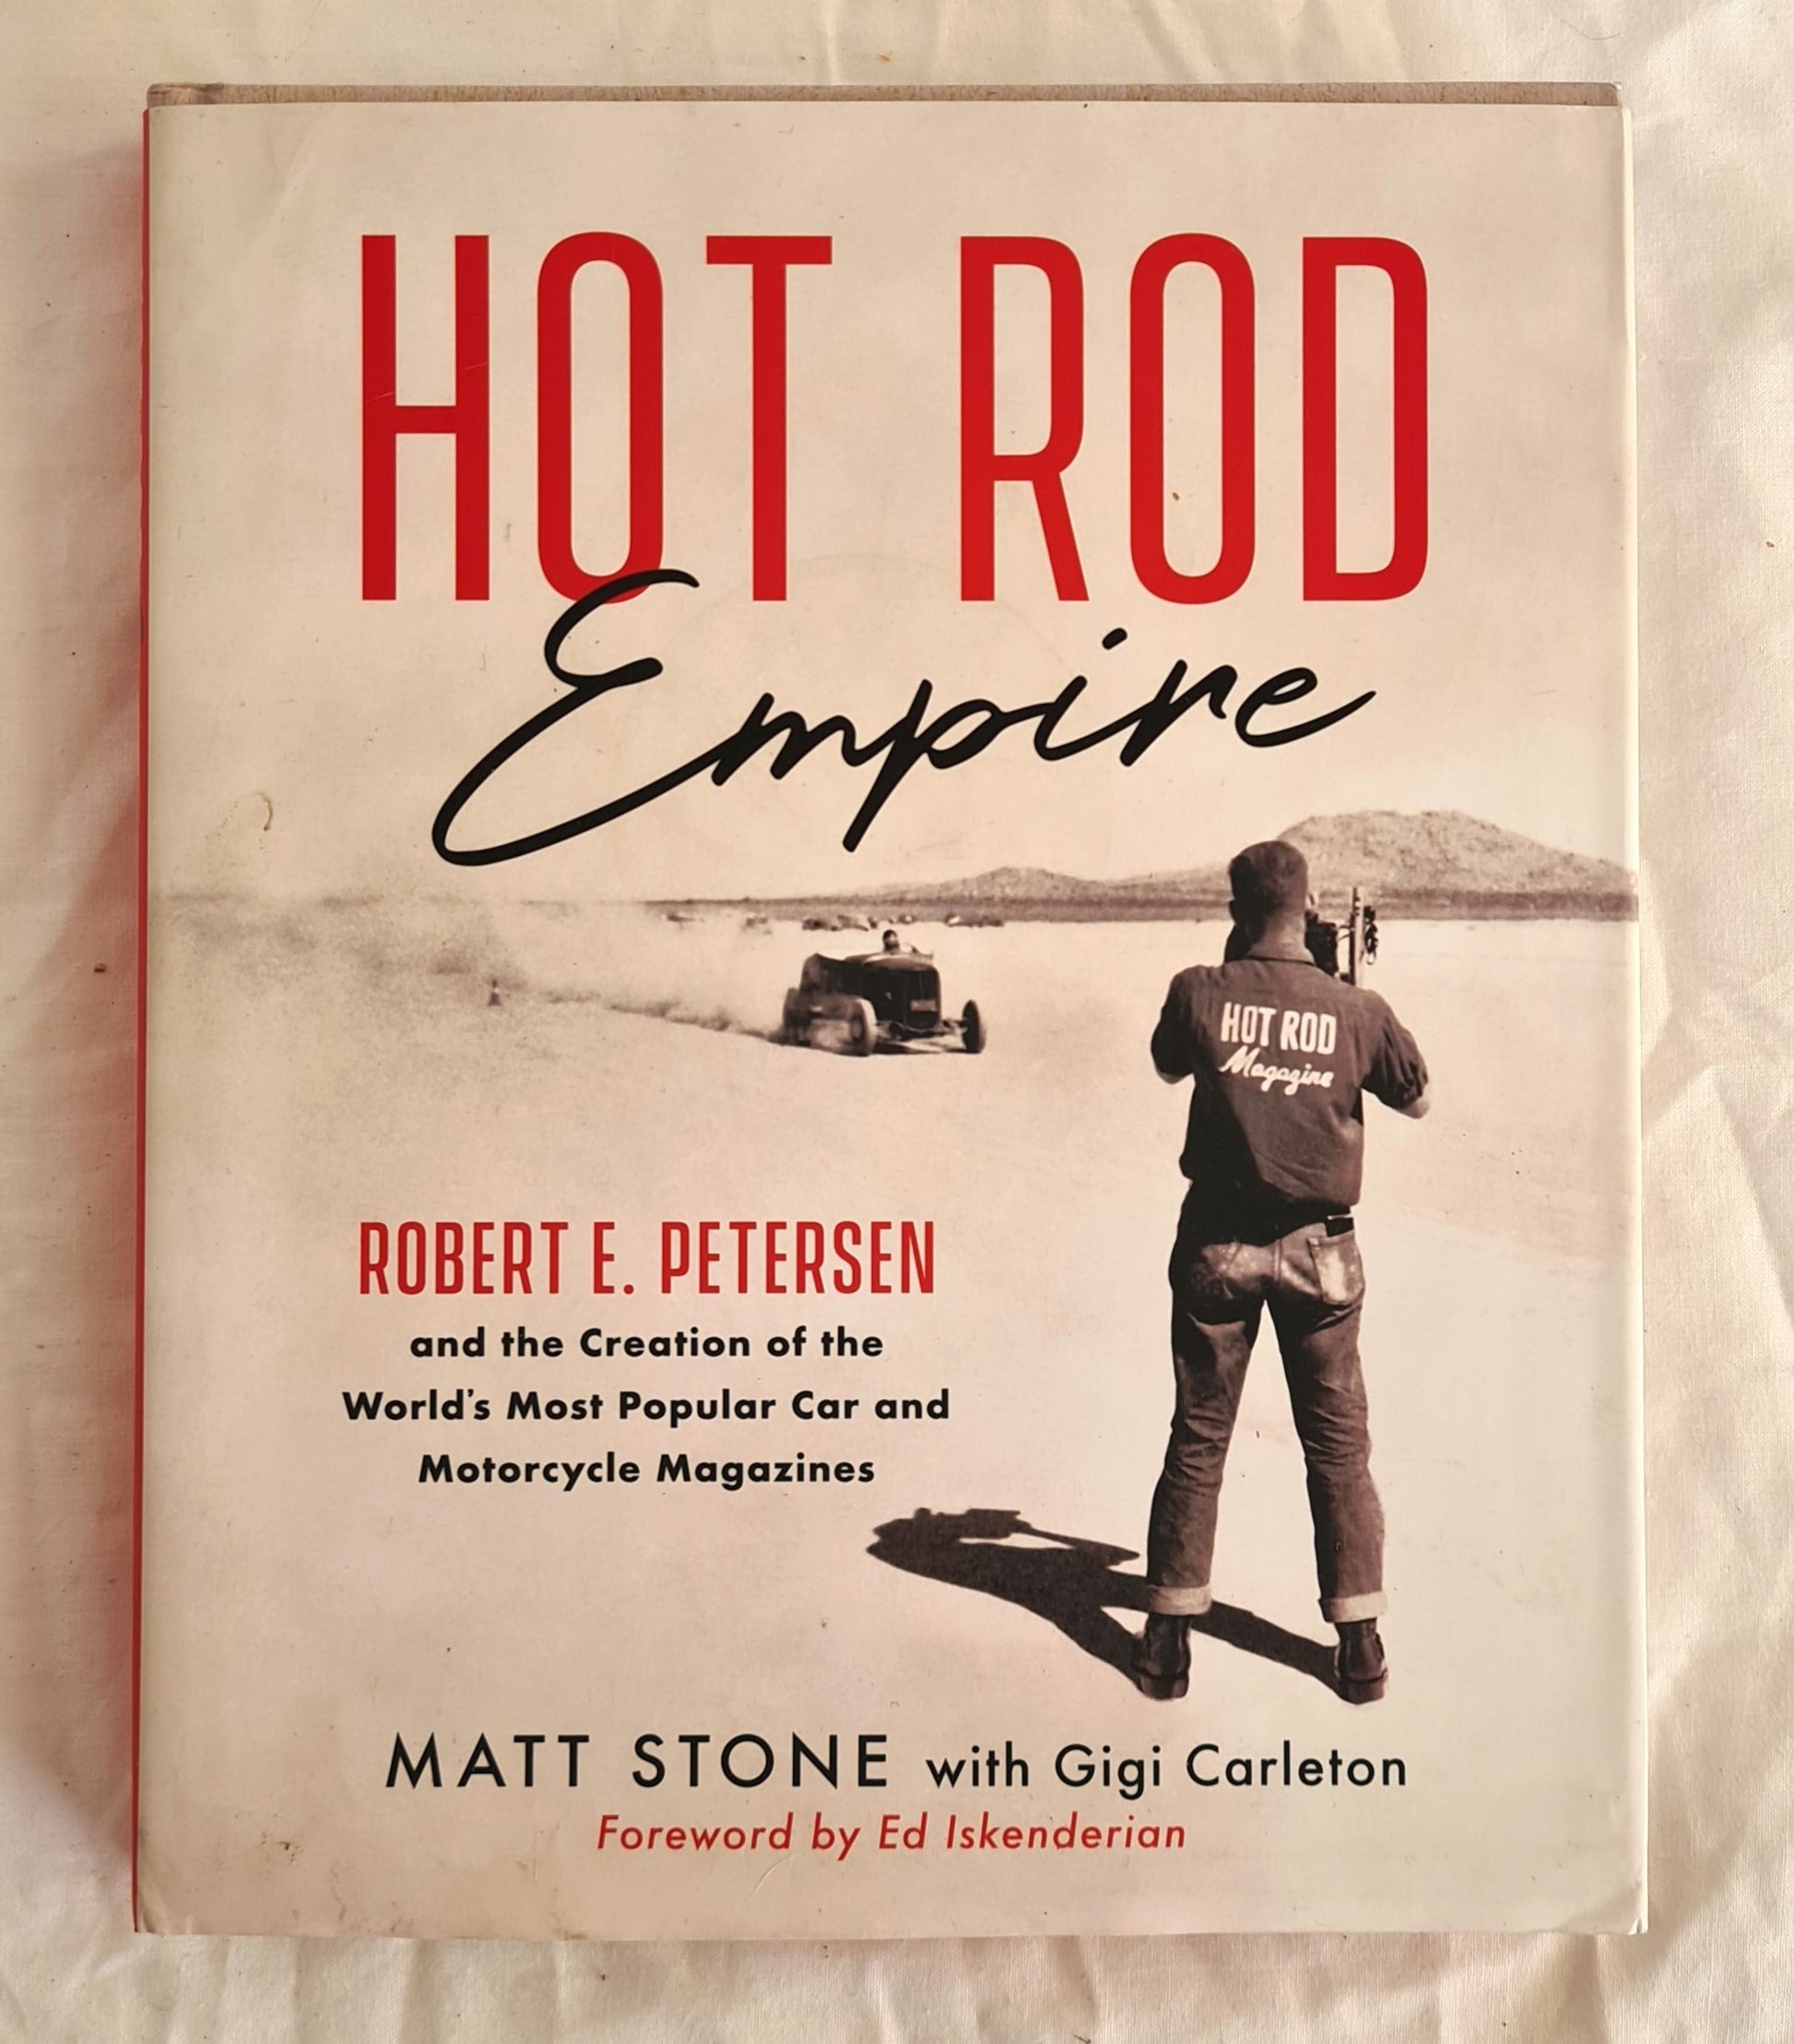 Hot Rod Empire  Robert E. Petersen and the Creatin of the World’s Most Popular Car and Motorcycle Magazines  by Matt Stone with Gigi Carleton